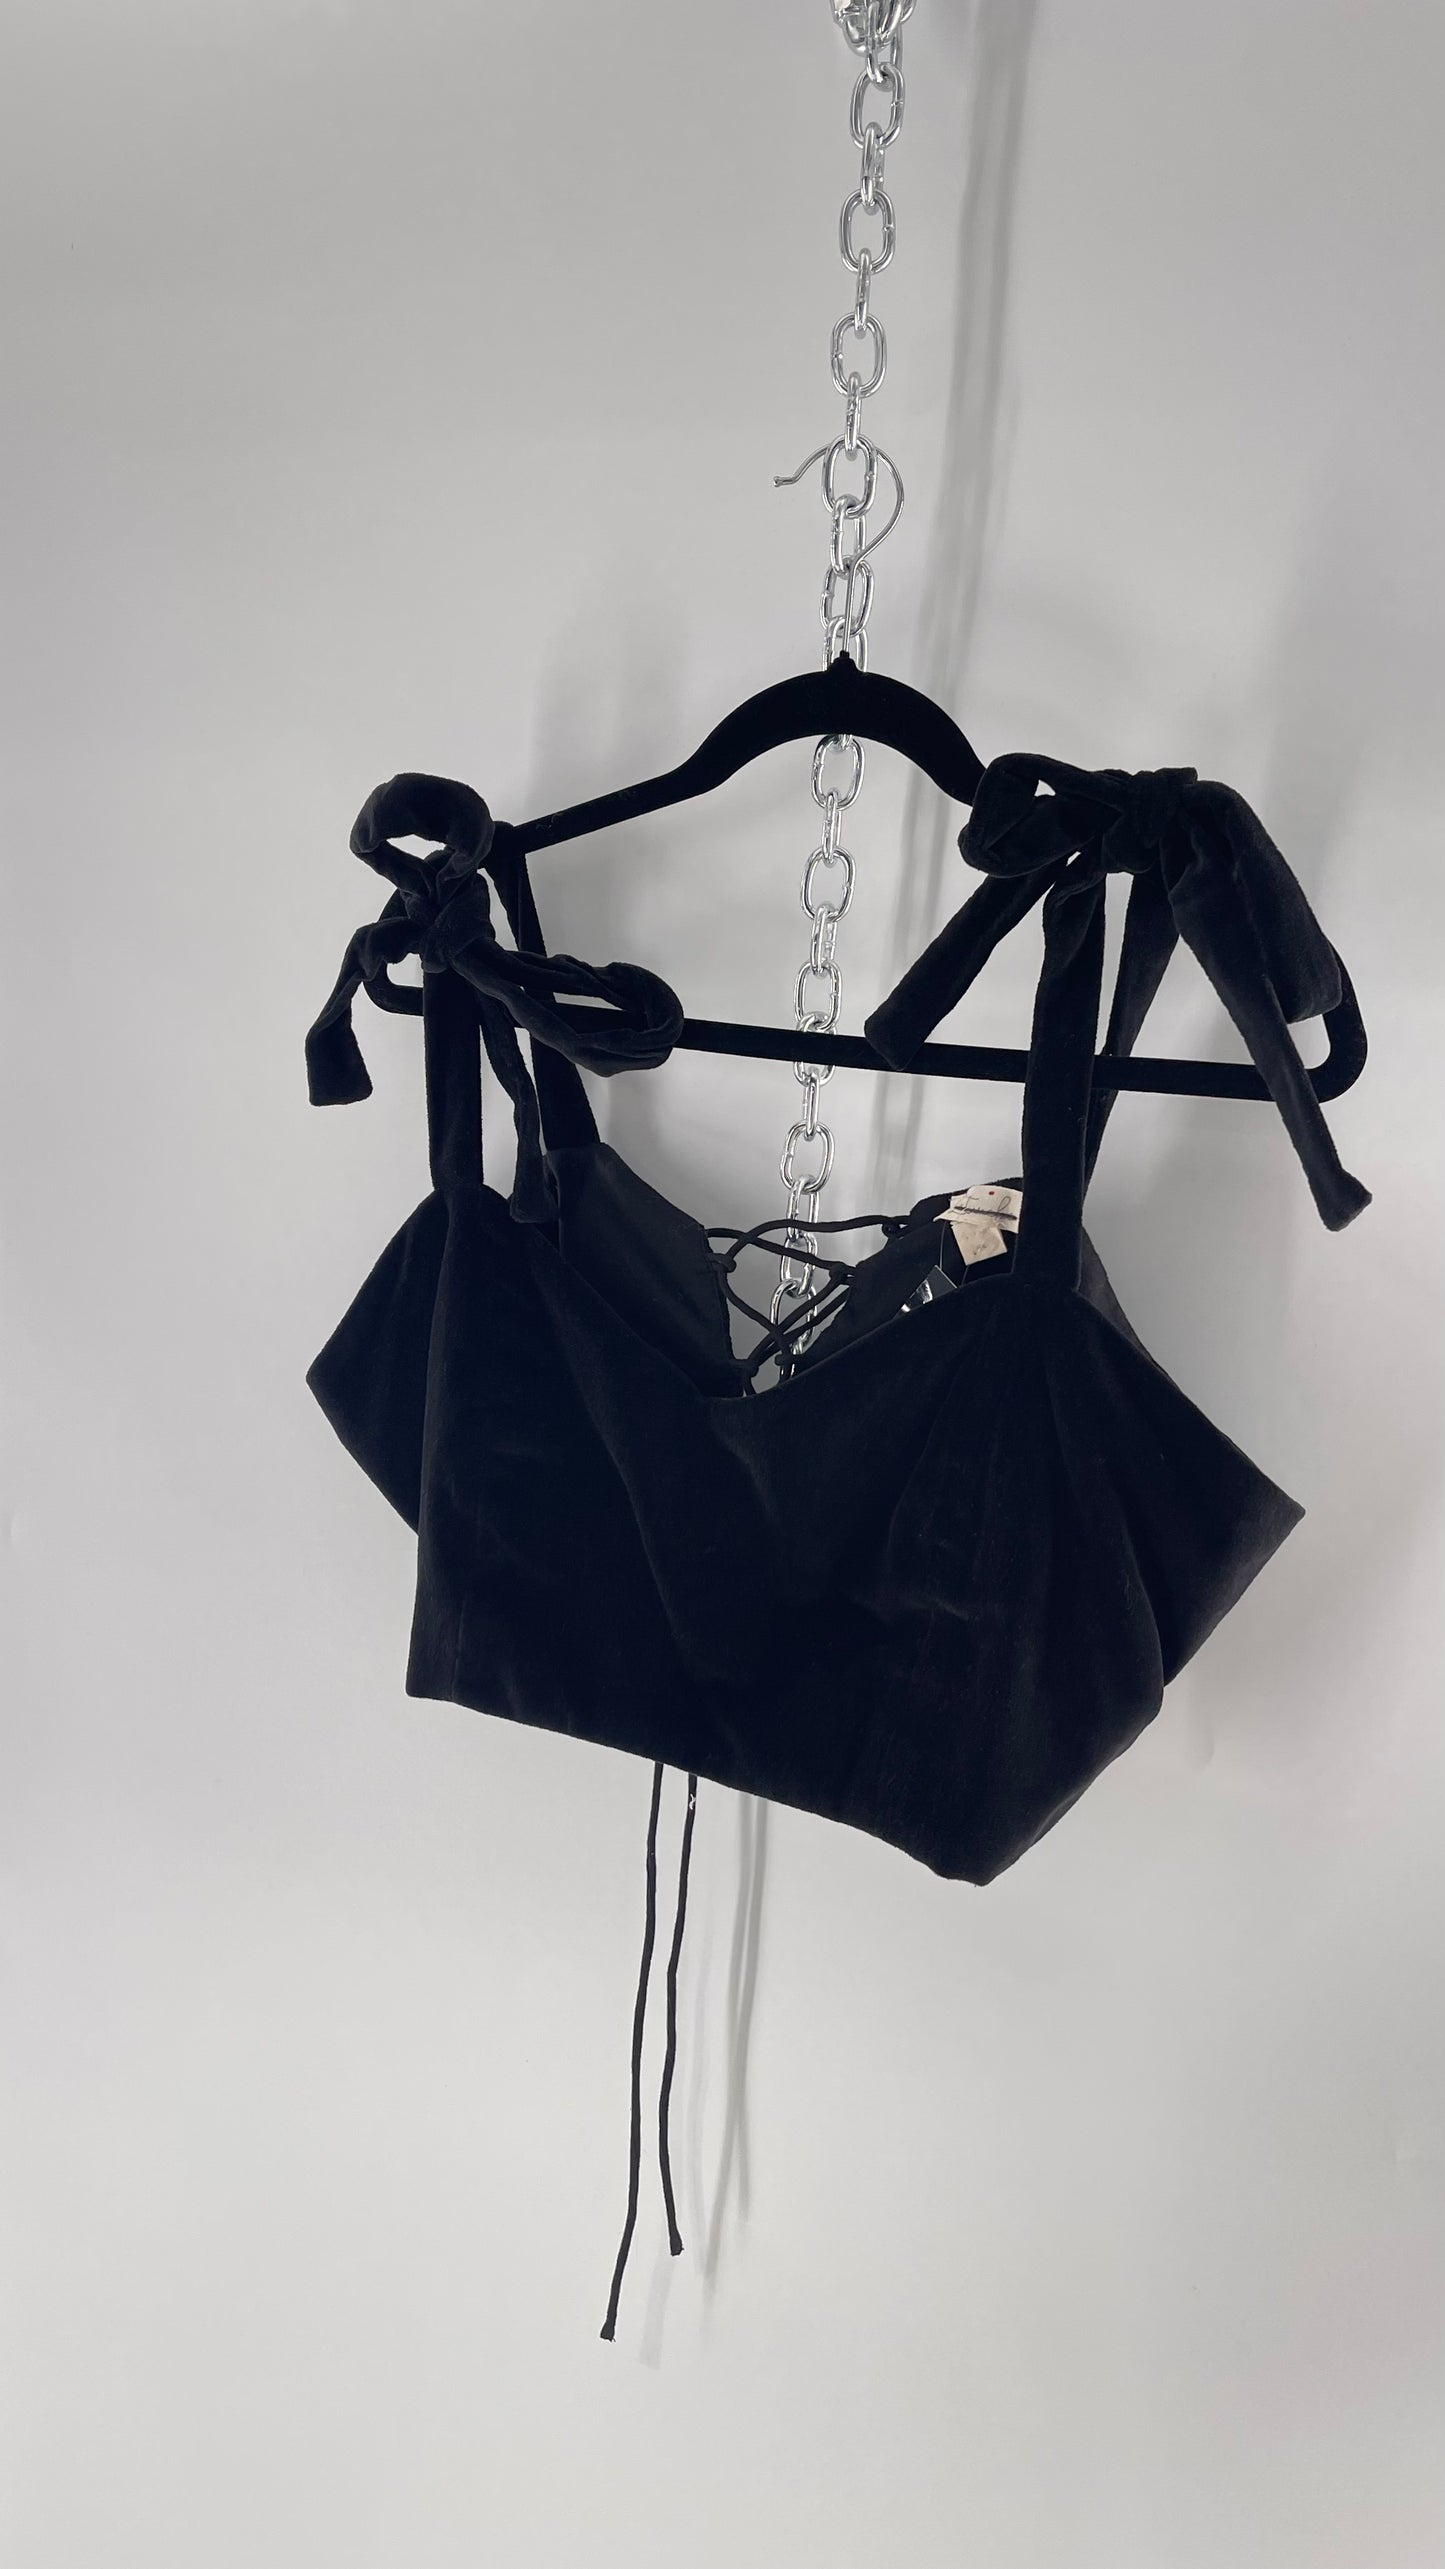 Letmebe Anthropologie  Black Velvet Cropped Tank with Delicate, Romantic Tie Shoulders and Lace Up Back (XL)